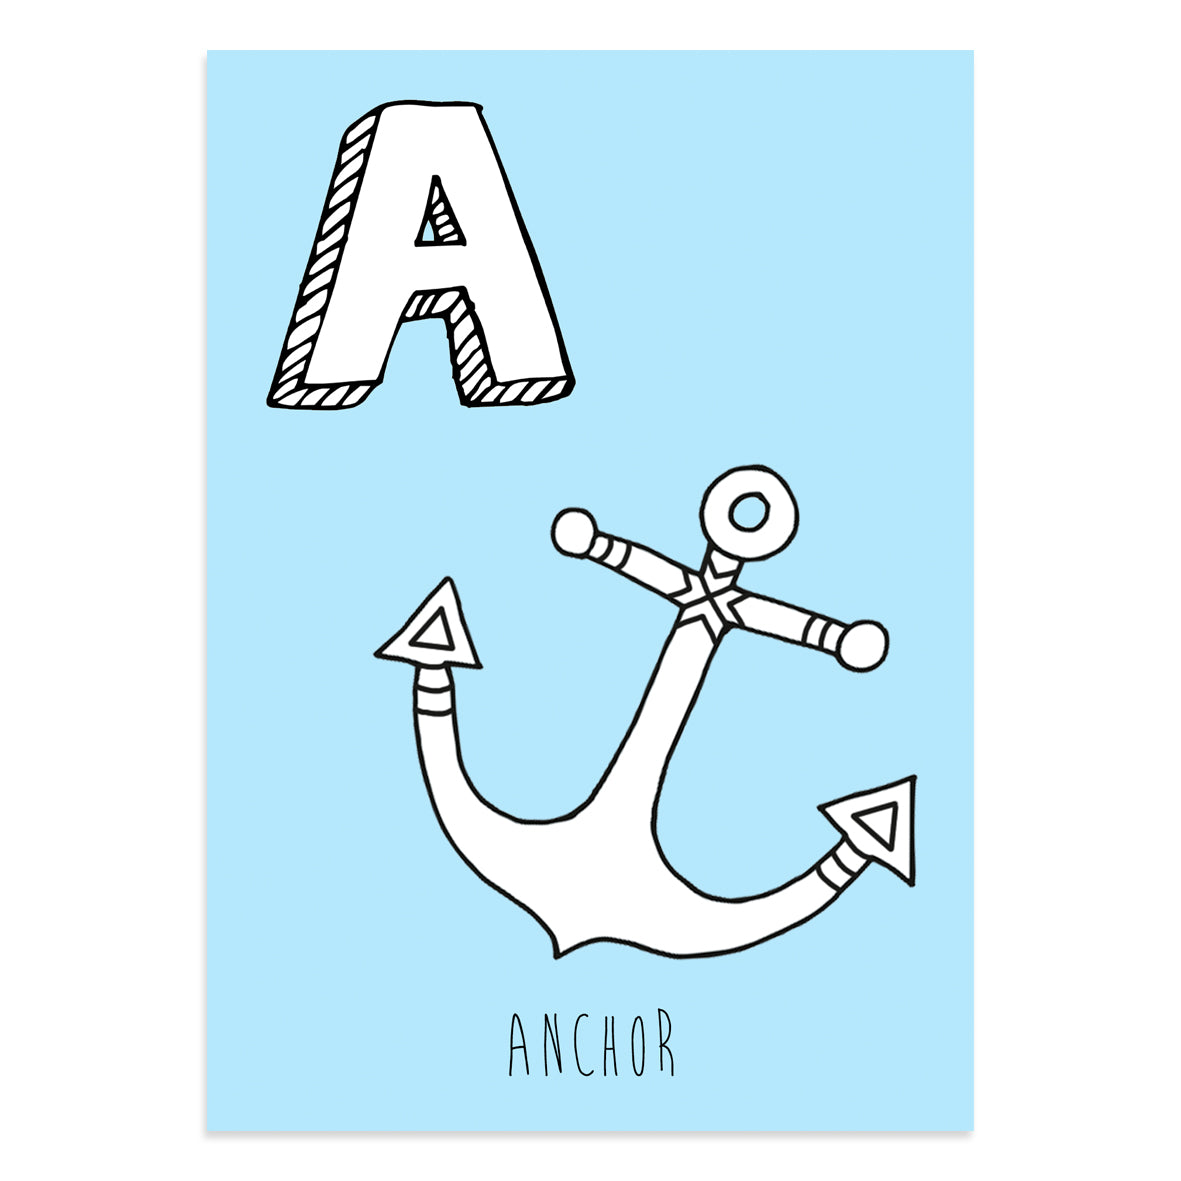 Blue postcard featuring the letter A for anchor